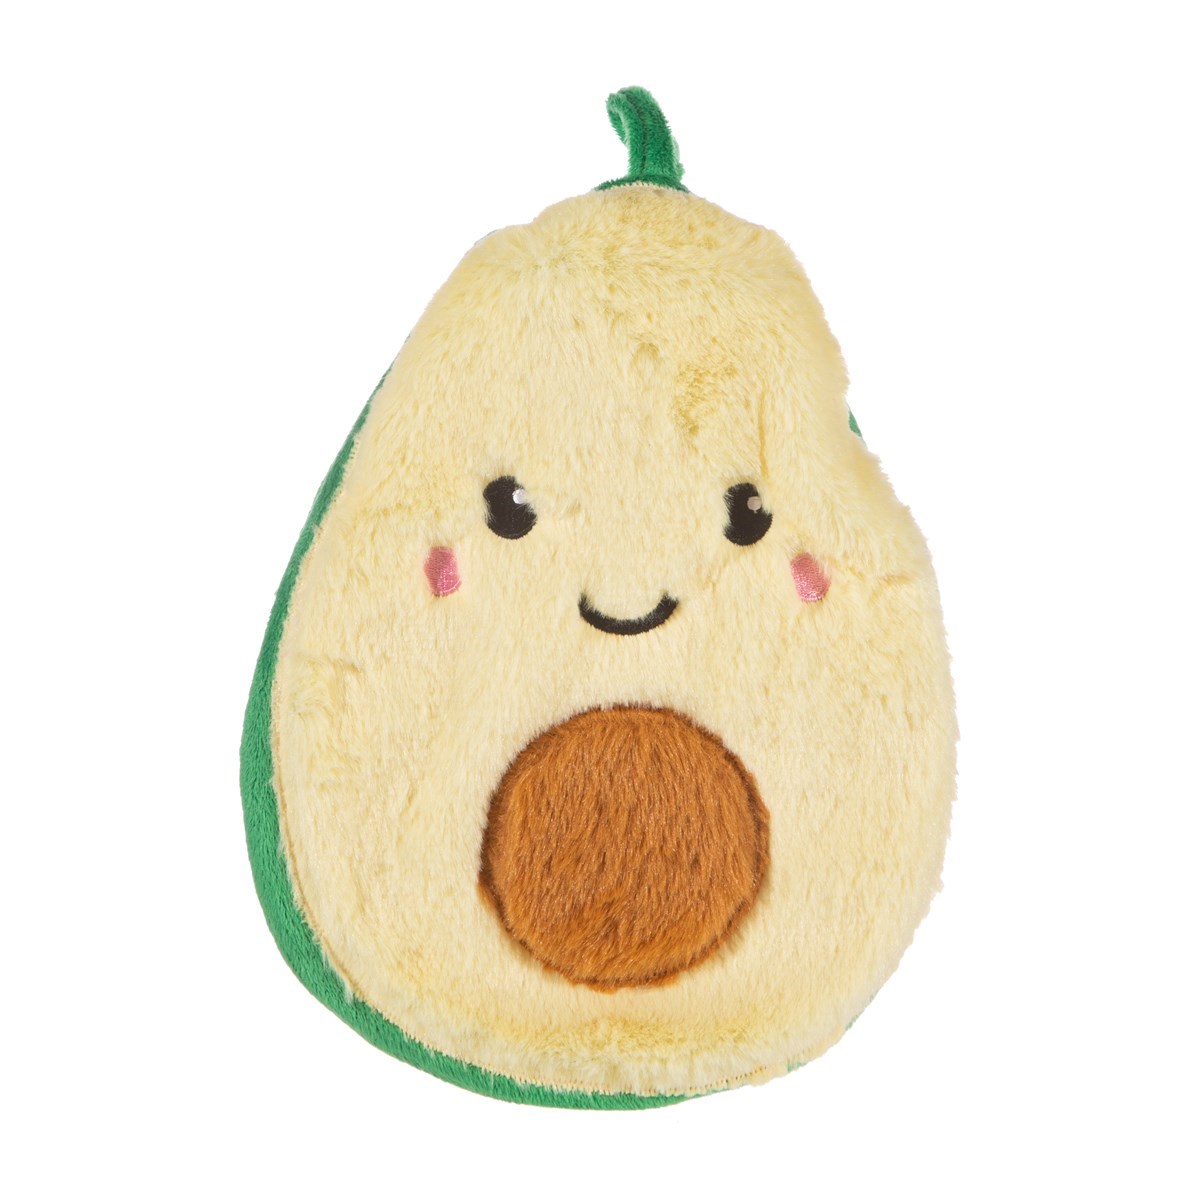 Sass and Belle Avocado Design Hot Water Bottle